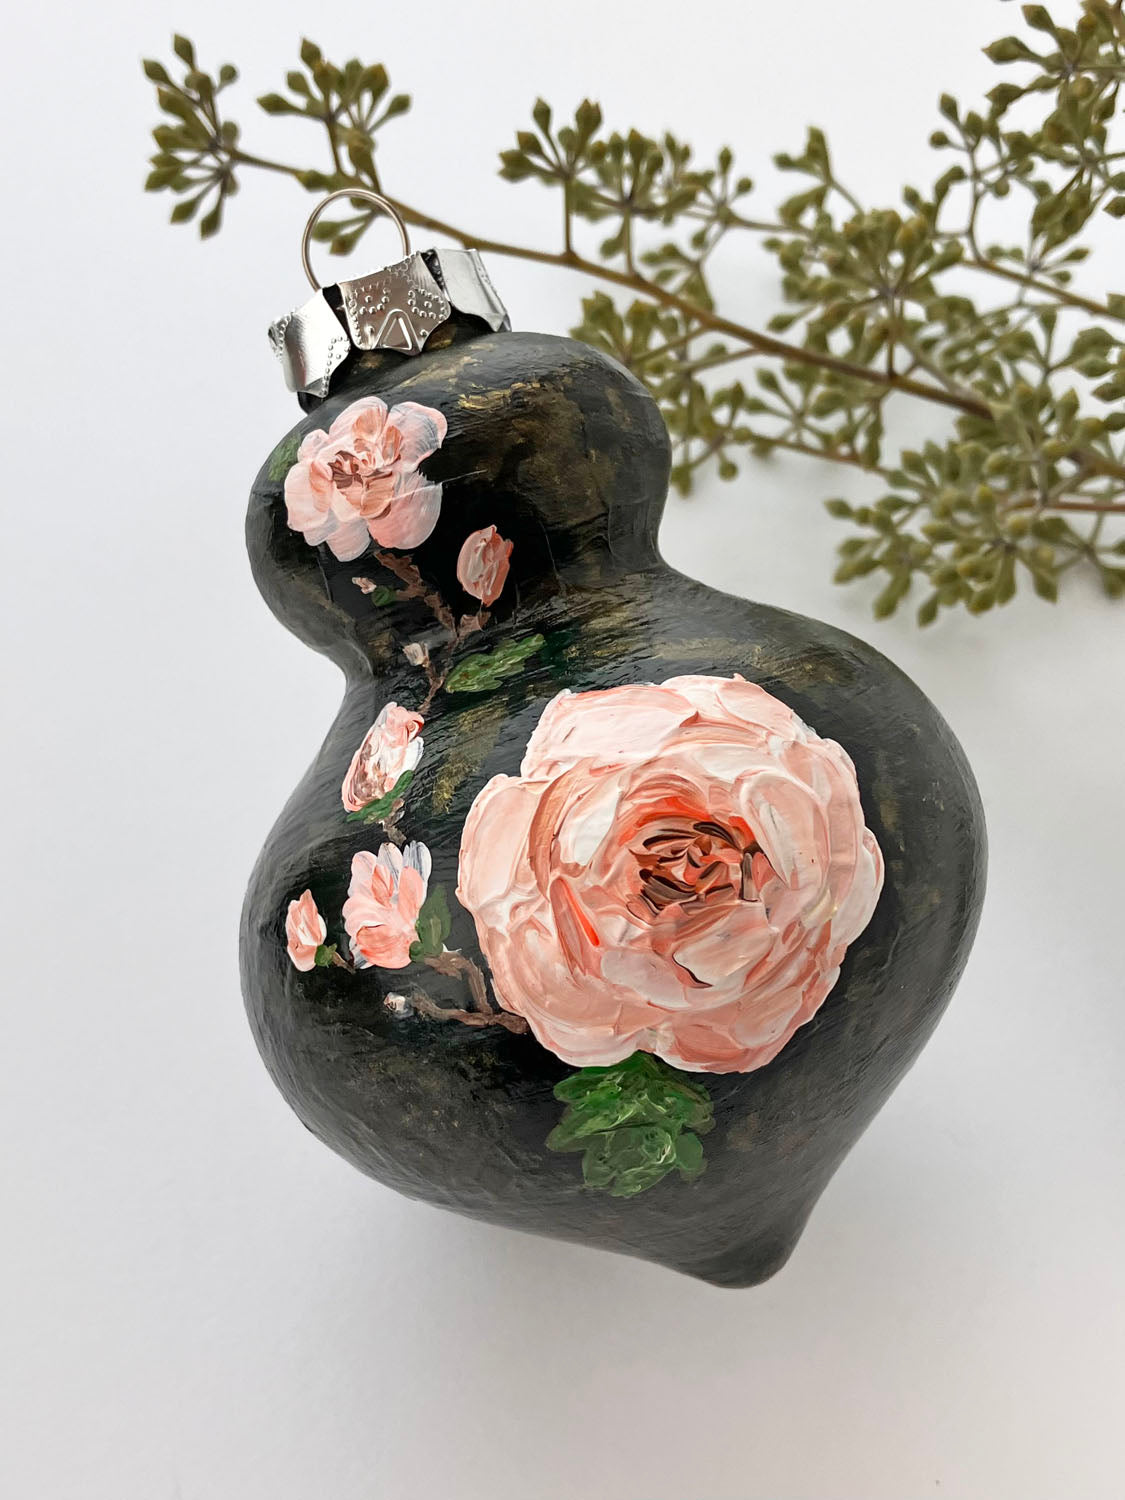 Hand Painted Ceramic Ornament #5 - Roses, Finial Ornament